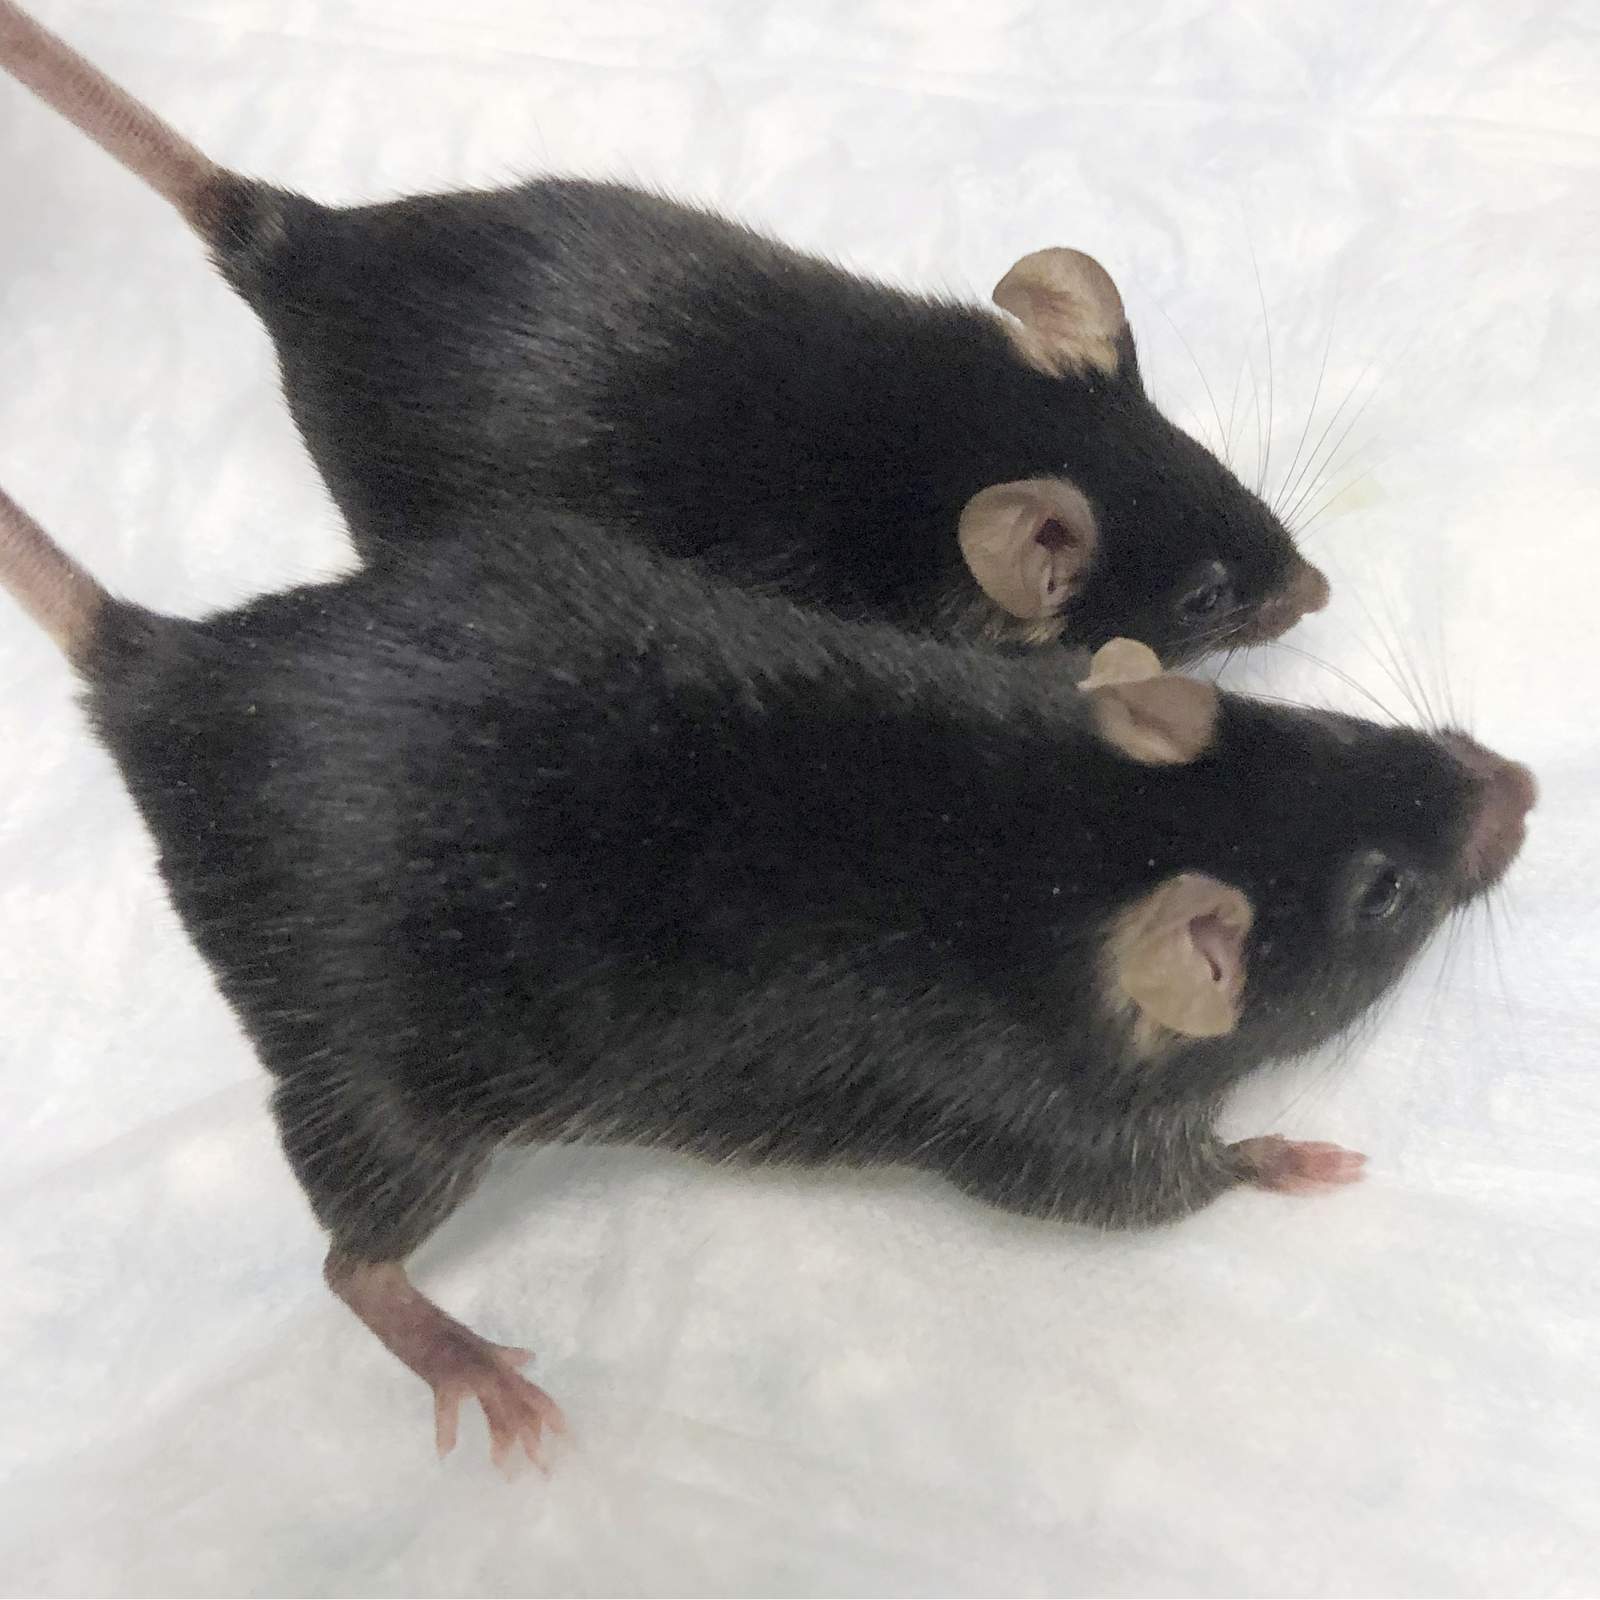 ‘Mighty mice’ stay musclebound in space, boon for astronauts